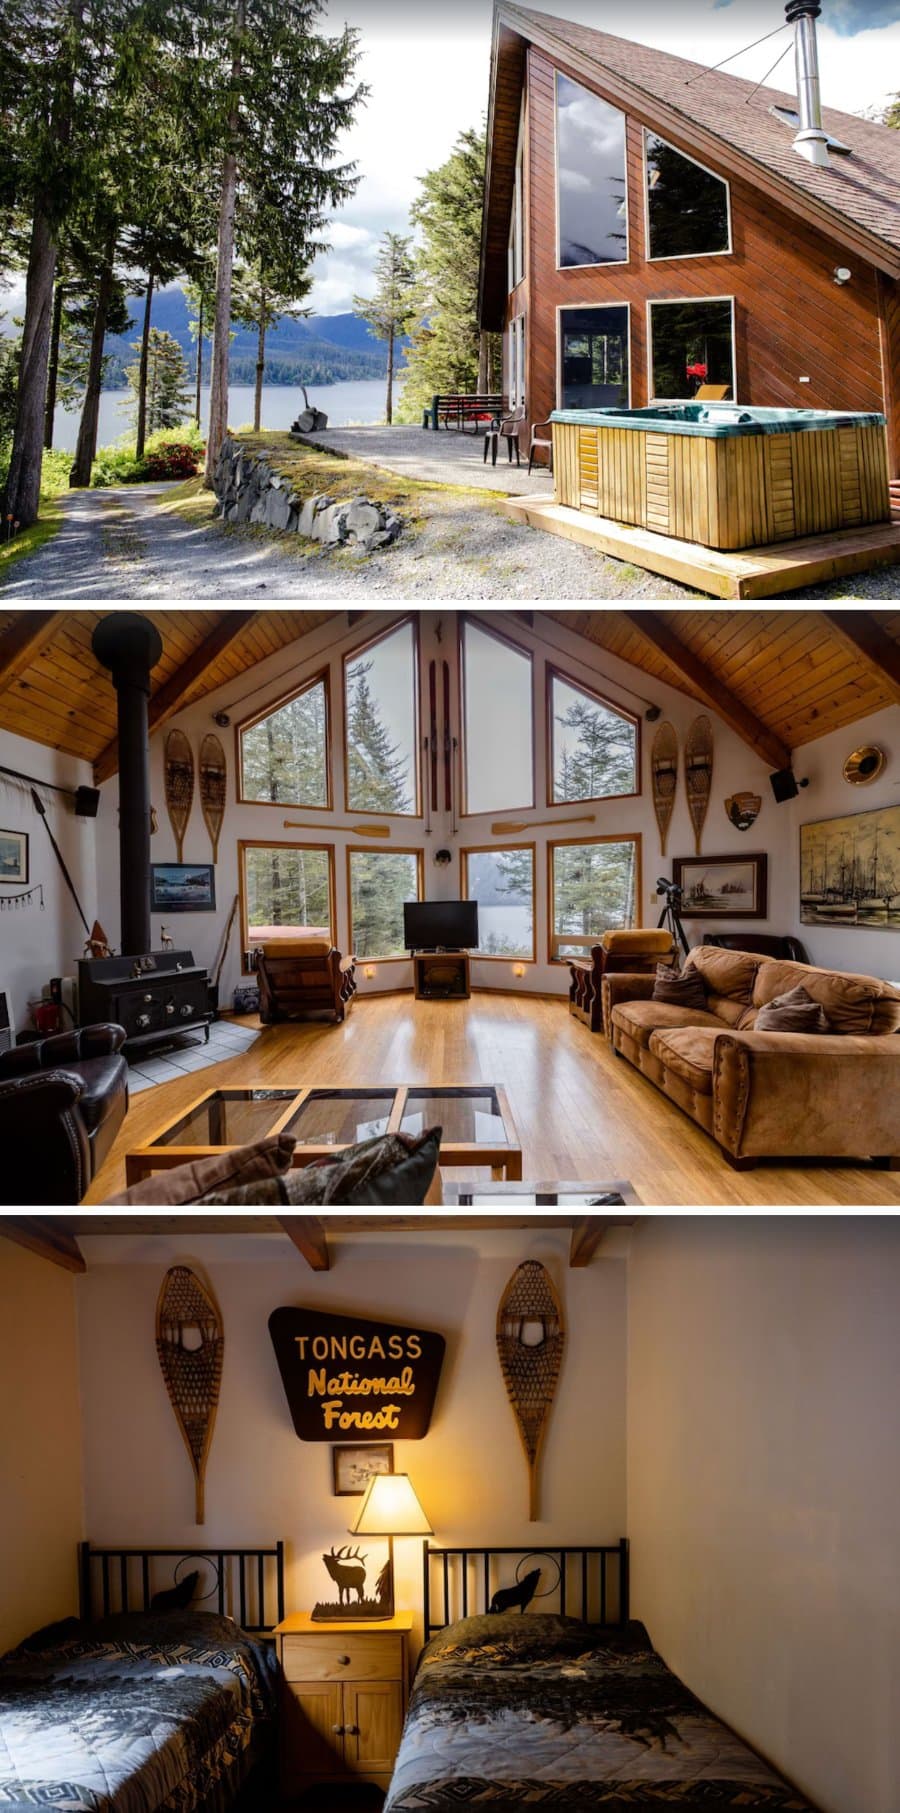 Interior and exterior images of this waterfront cabin in Sitka, Alaska